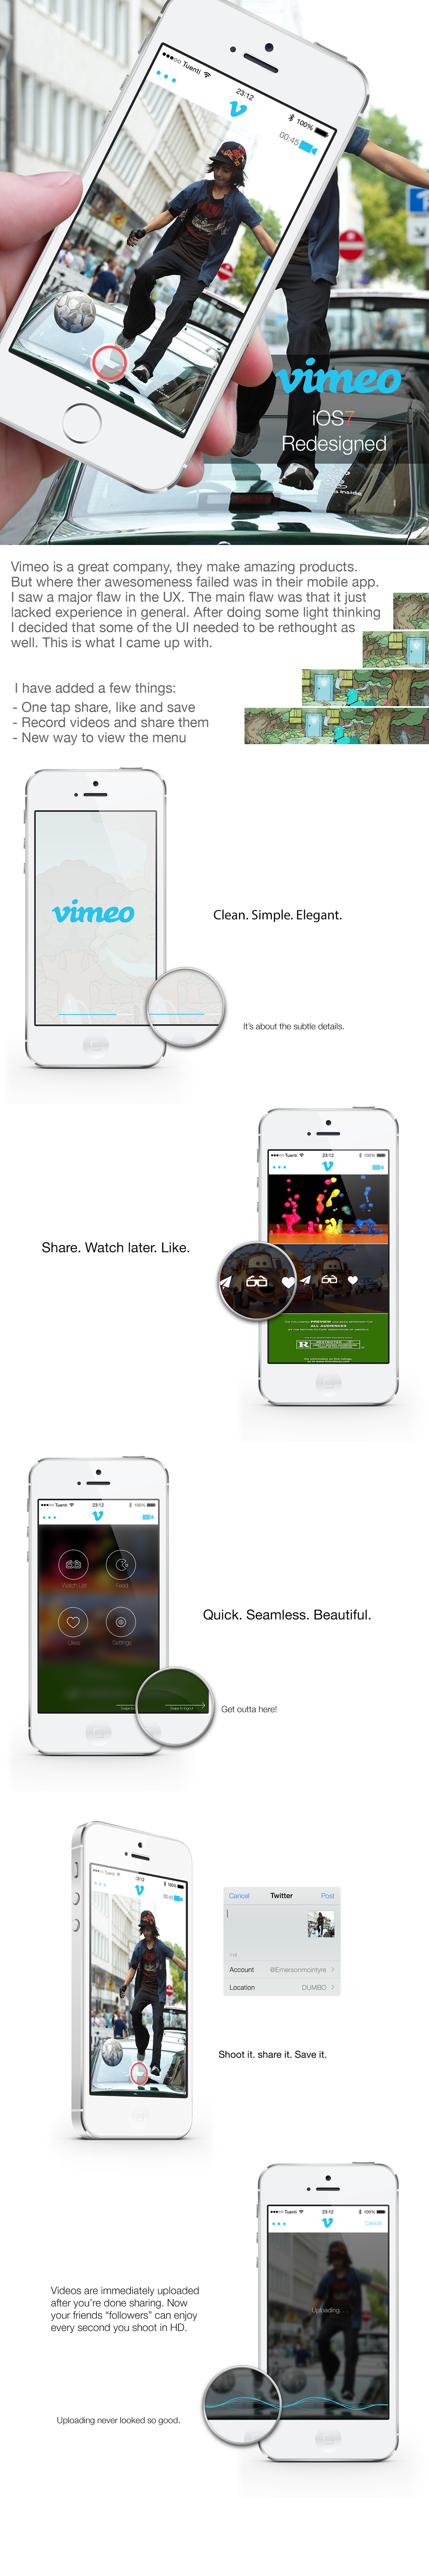 vimeo design redesign apps ios7 new awesome cool flat nomore iphone apple curated videos